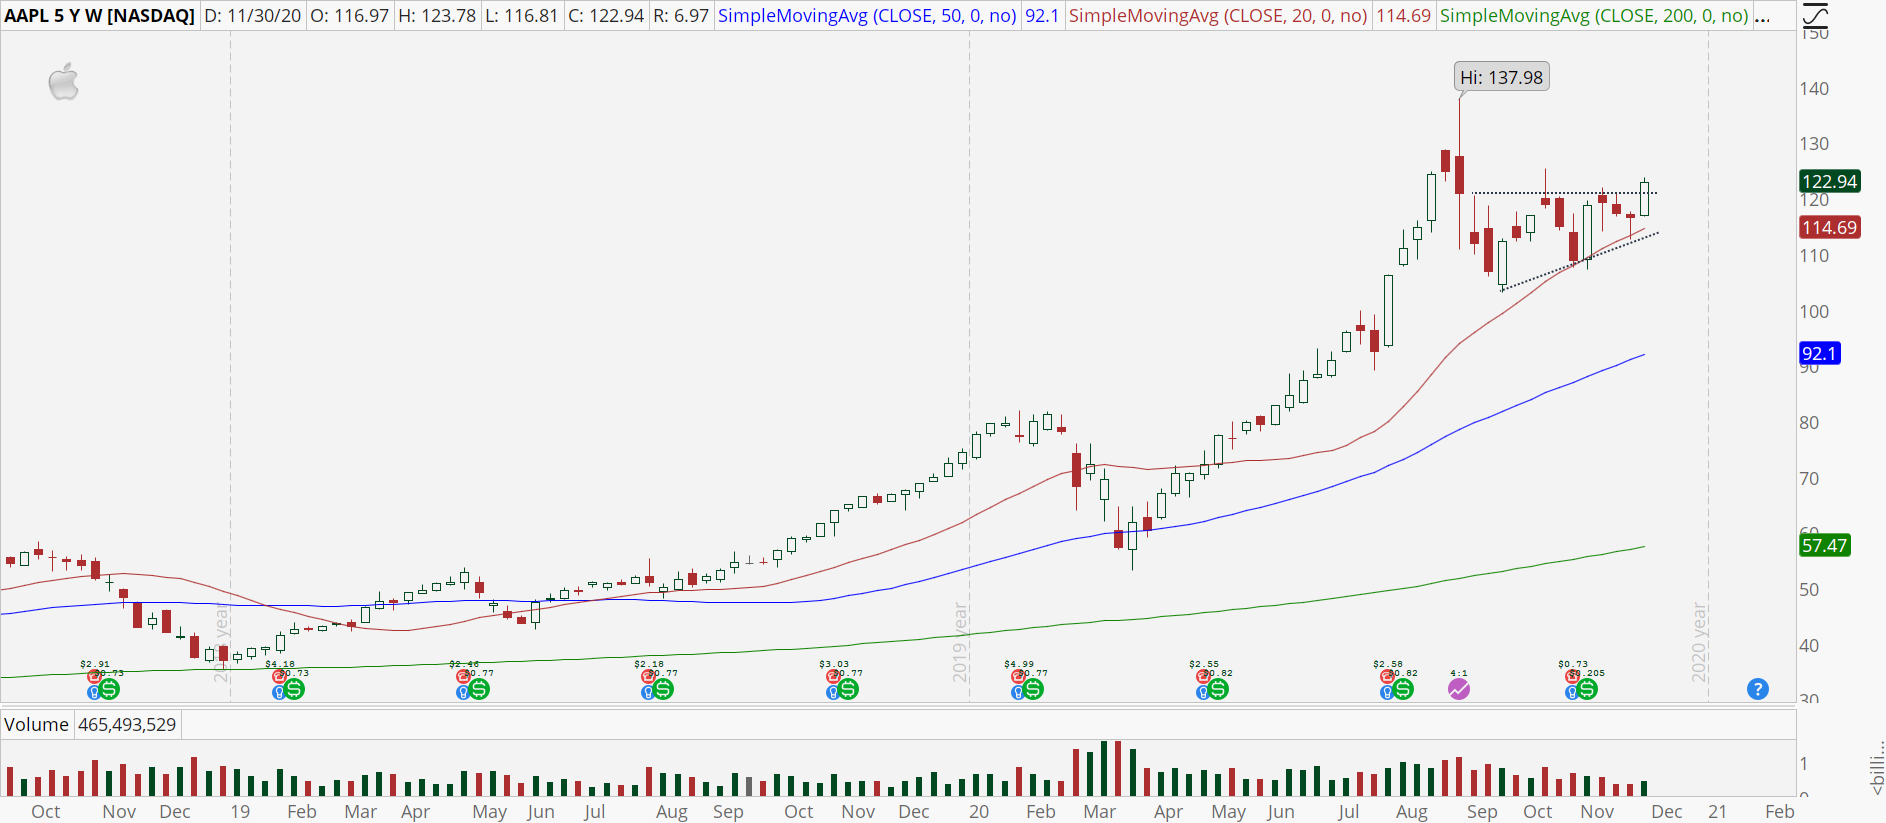 Apple (AAPL) weekly chart is breaking out